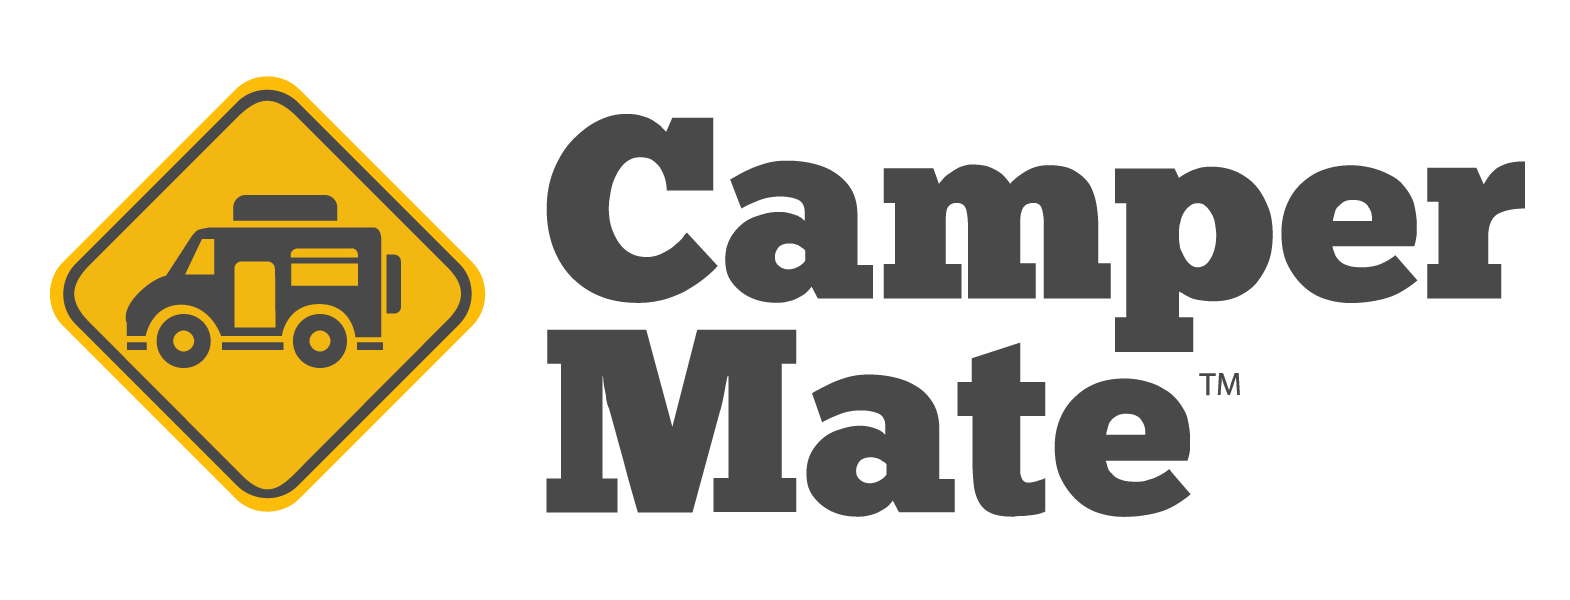 A yellow diamond sign icon with a dark grey camper van illustration inside, with grey text to the right that reads 'Camper Mate'